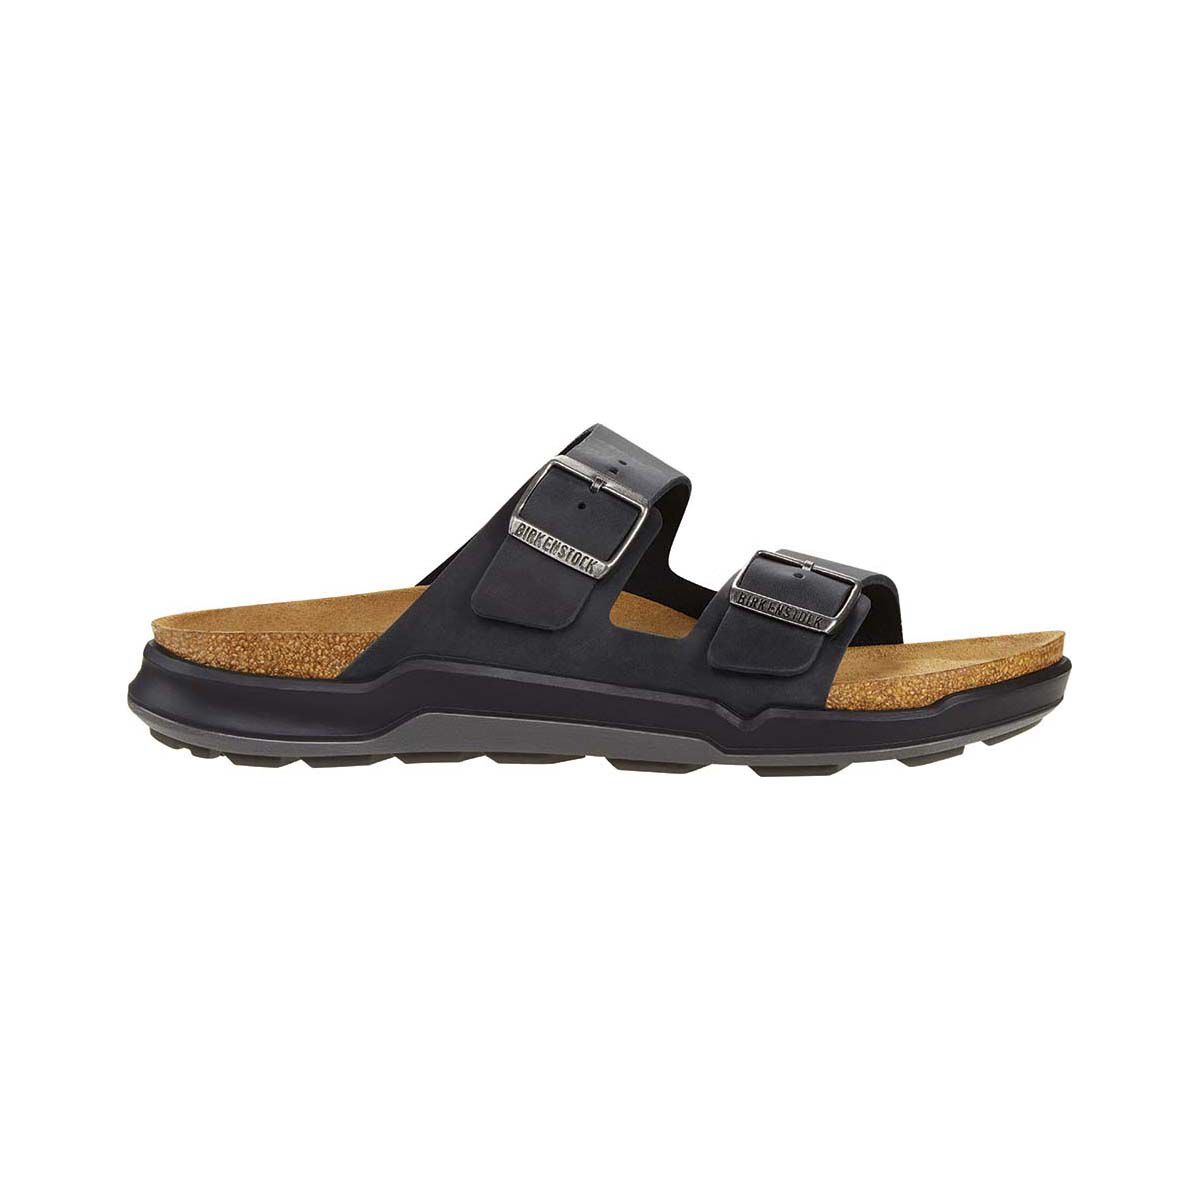 Aggregate more than 135 mens birkis sandals latest